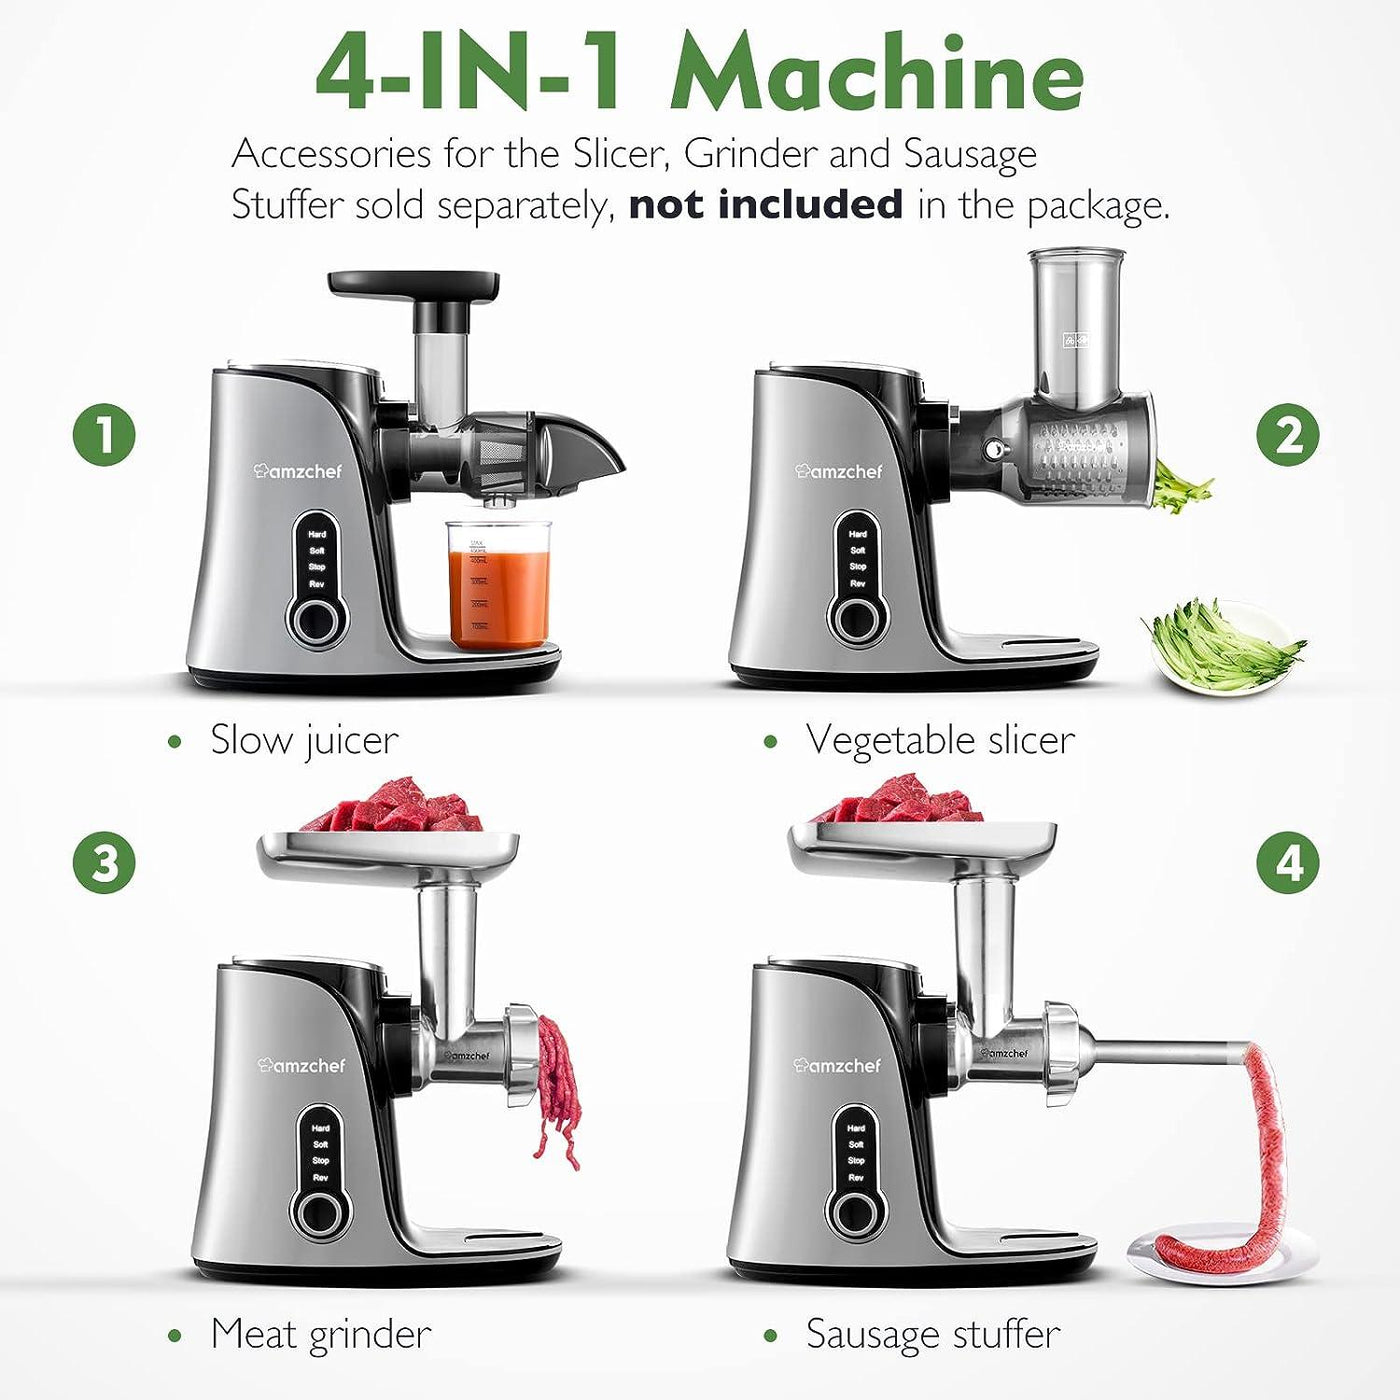 AMZCHEF Cold Press Juicer with 2 Speed Control - High Juice Yield - Massive Discounts